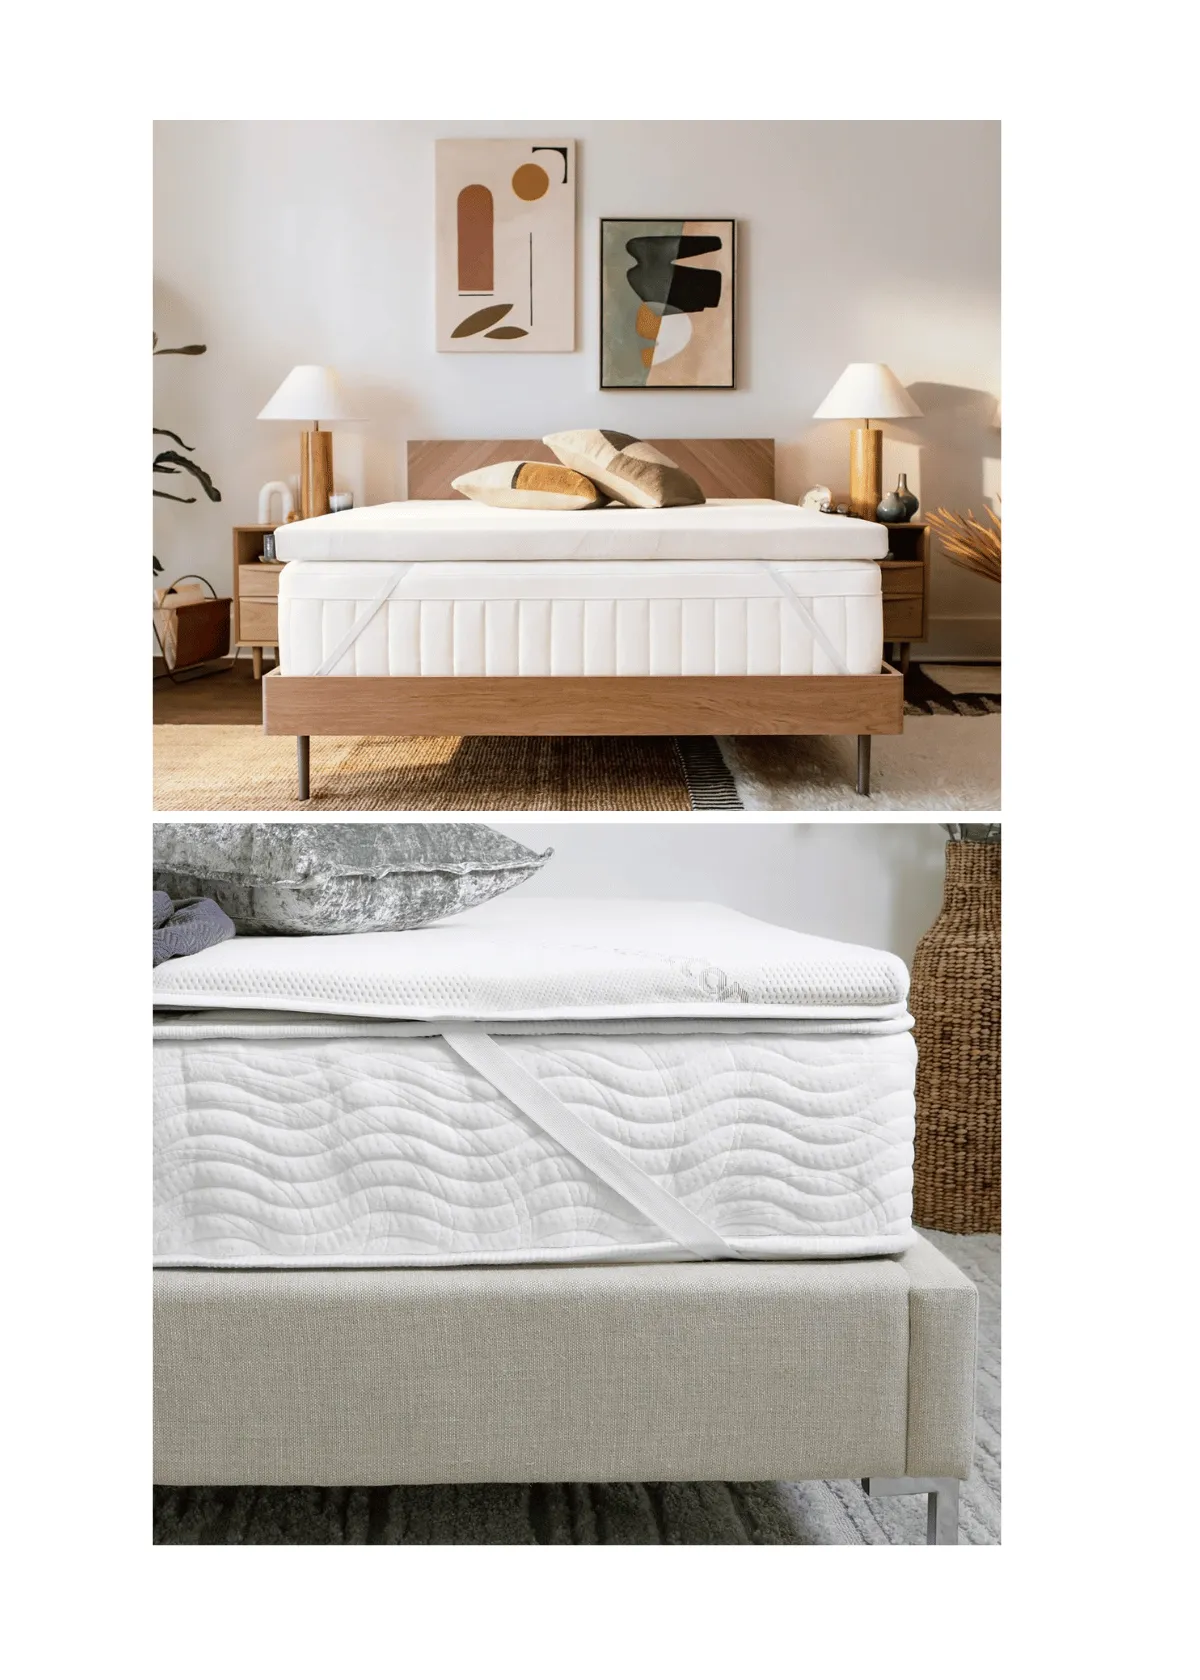 "Top-Rated Mattress Cushion Handpicks for Comfort and Support"